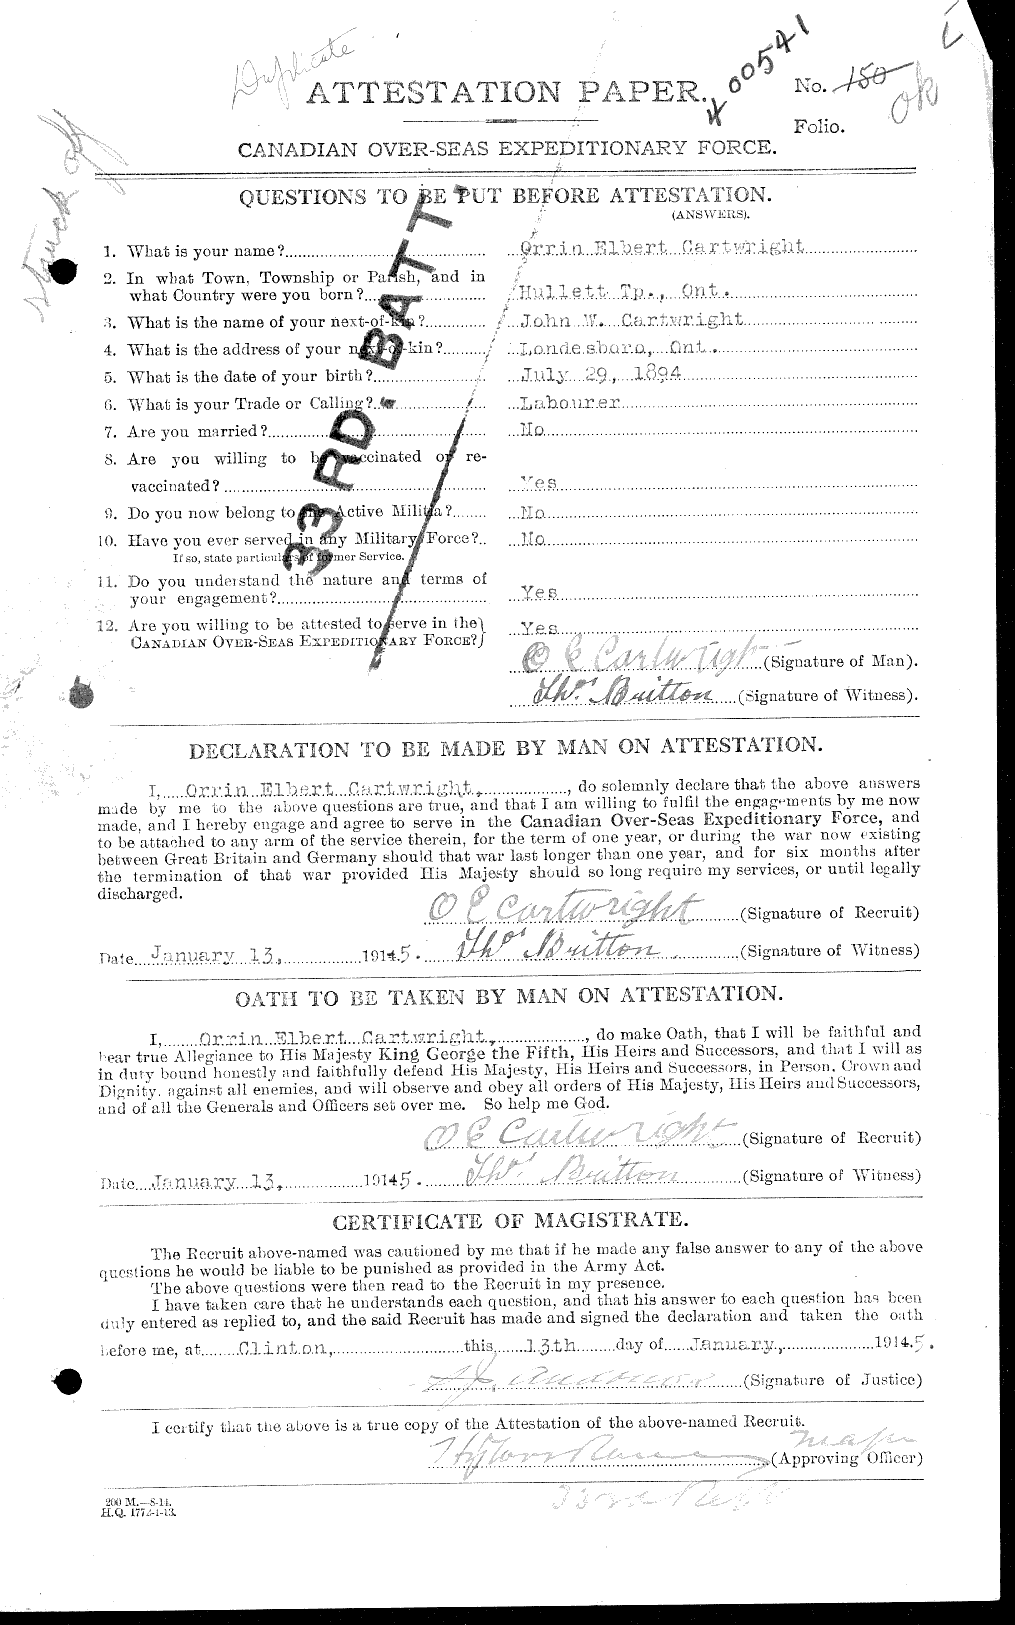 Personnel Records of the First World War - CEF 011613a